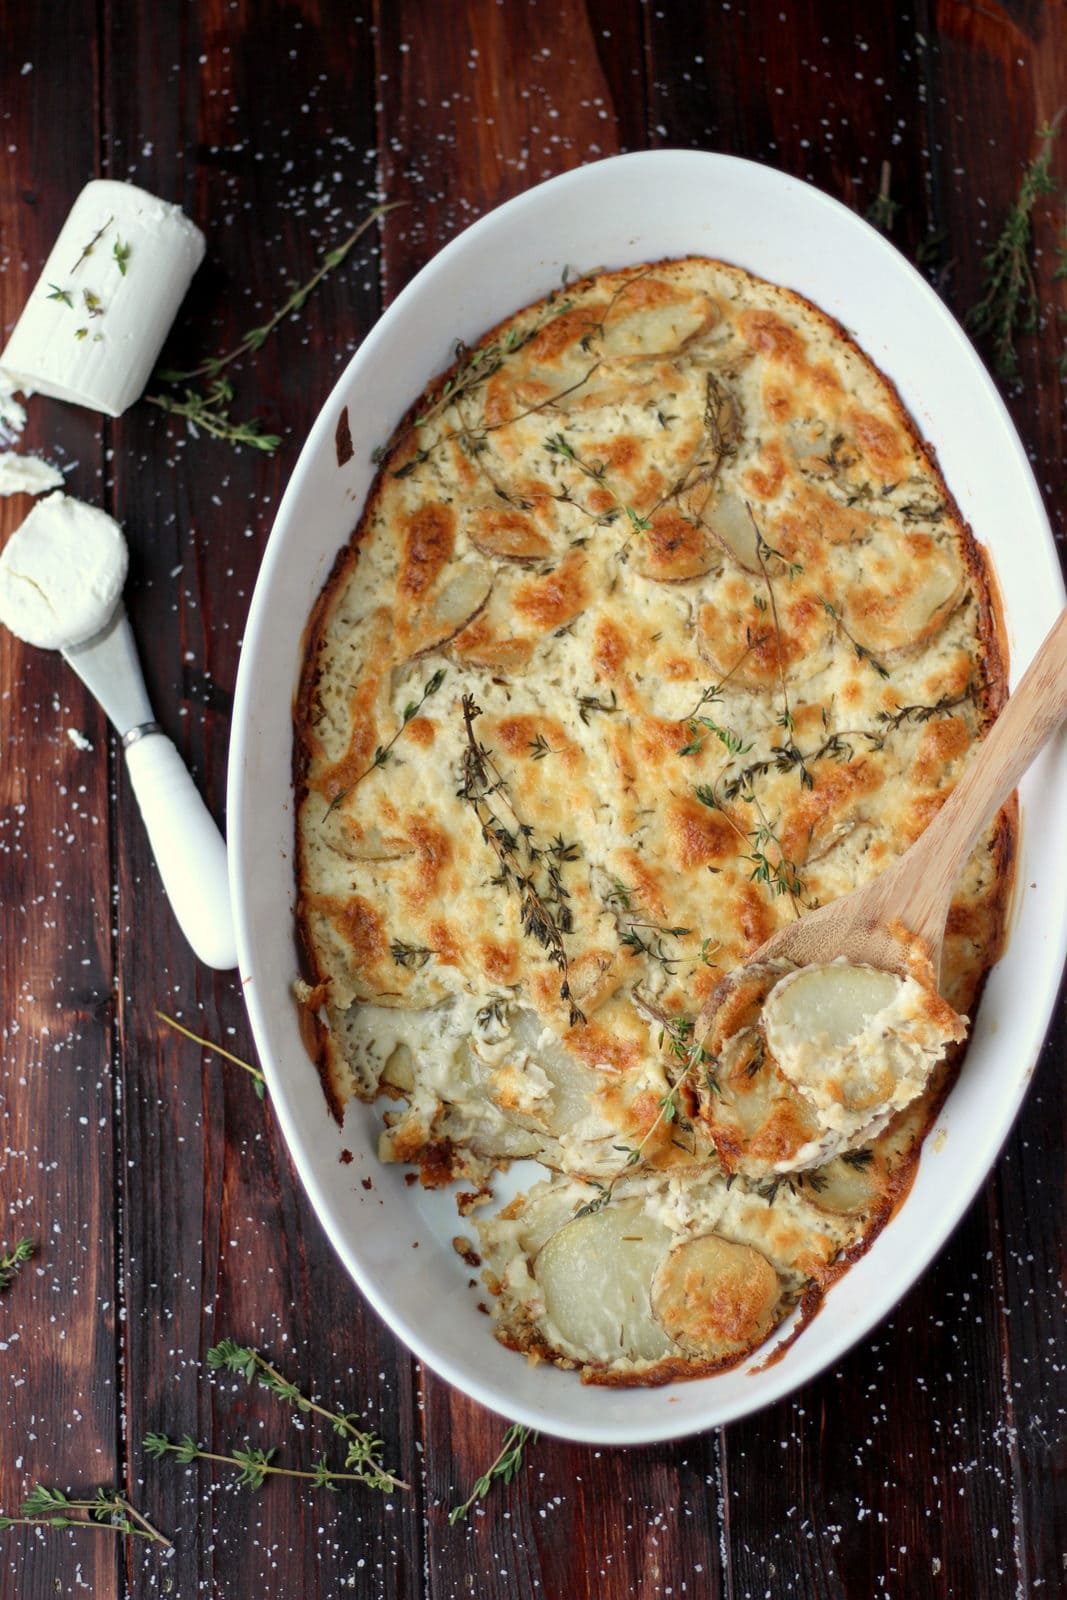 Goat Cheese Au Gratin Potatoes + Browned Butter and Fresh Thyme - perfect side dish recipe for Thanksgiving or any meal! thewoodenskillet.com #foodphotography #foodstyling